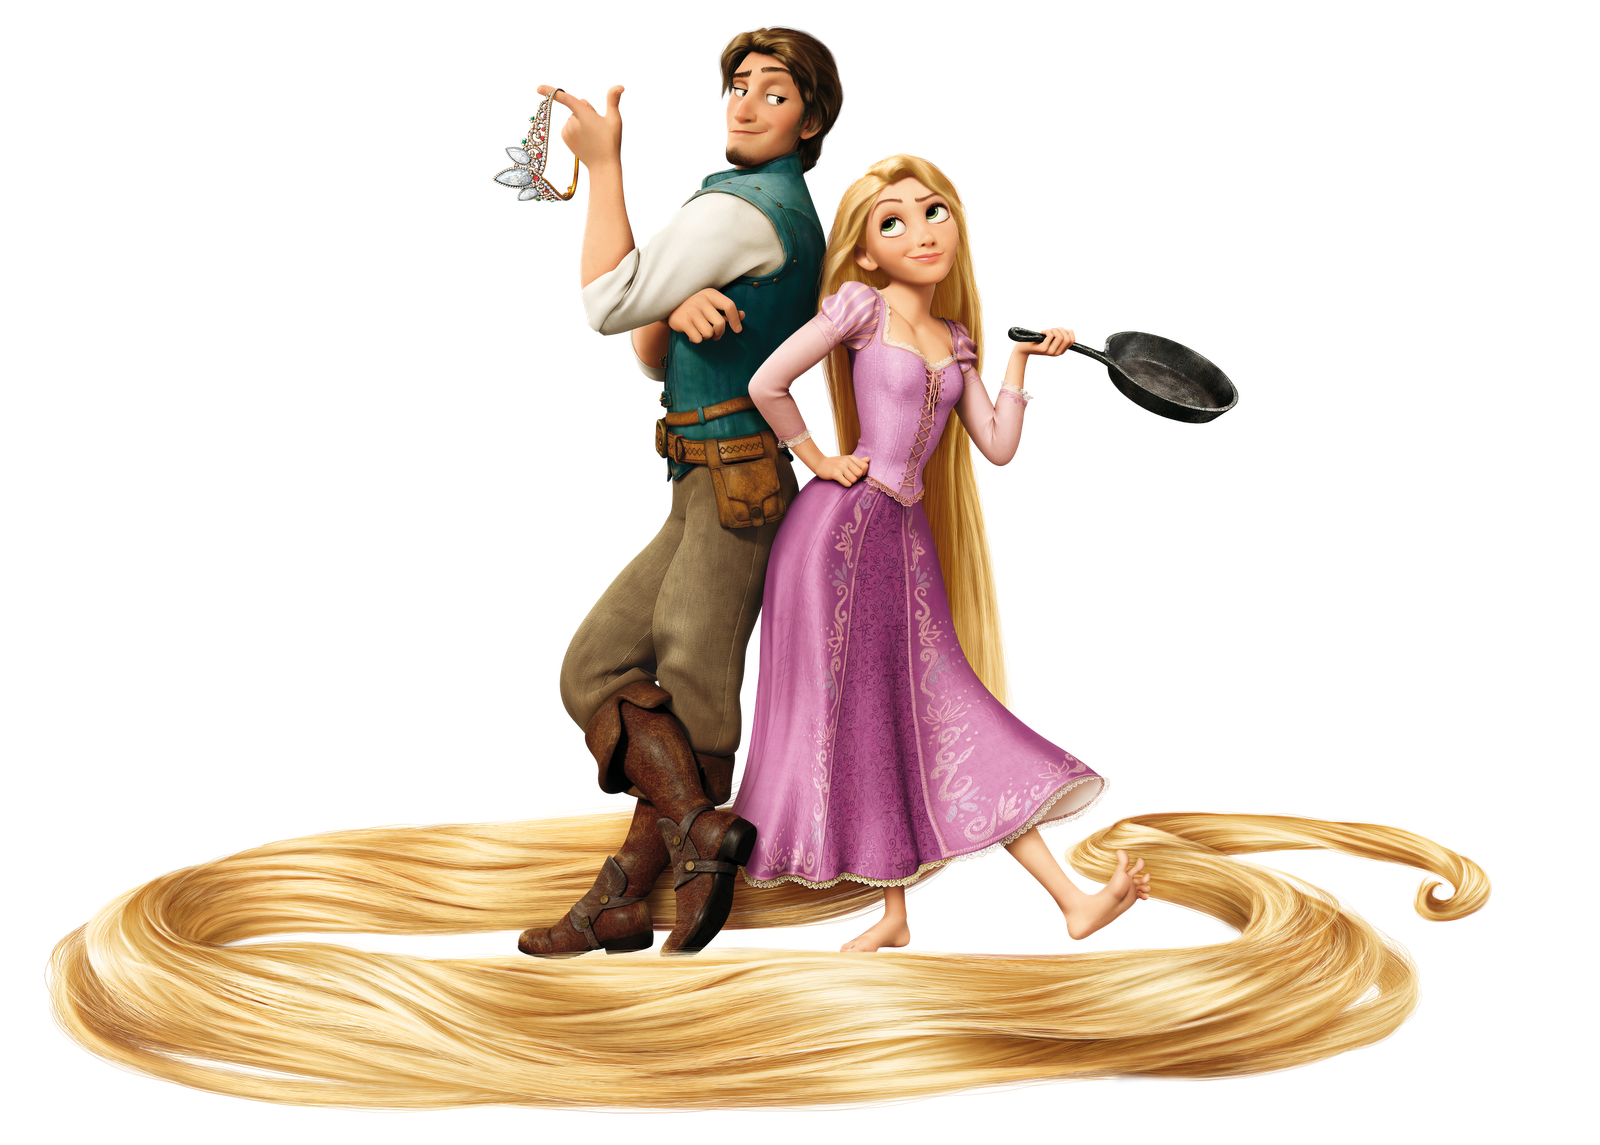 Image Flynn And Rapunzelpng Disney Wiki Fandom Powered By Wikia